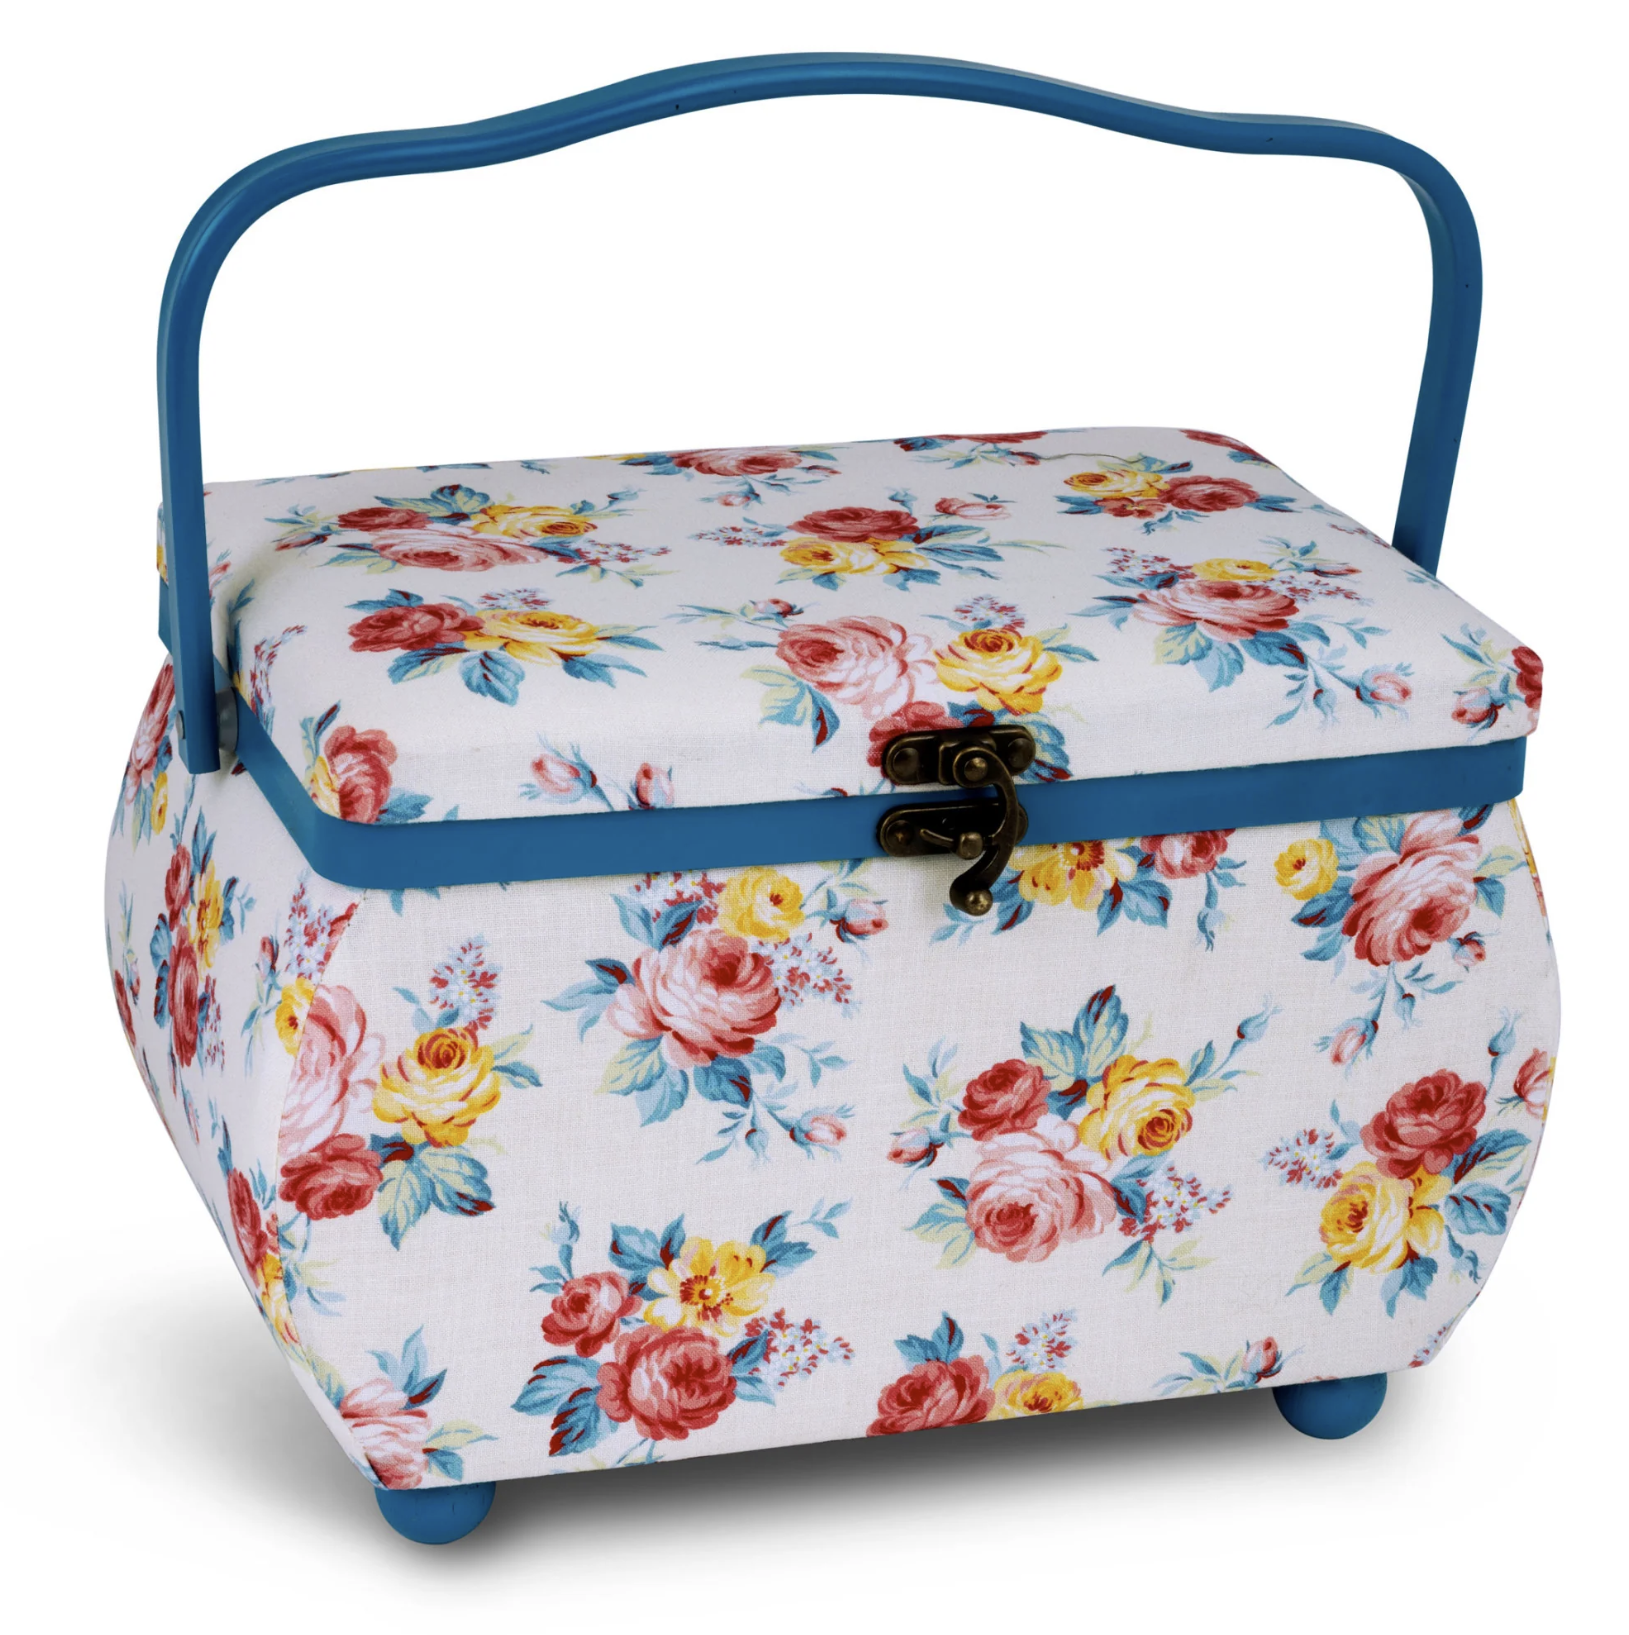 Medium Curved Sewing Basket (Floral Print Design) by DRITZ®